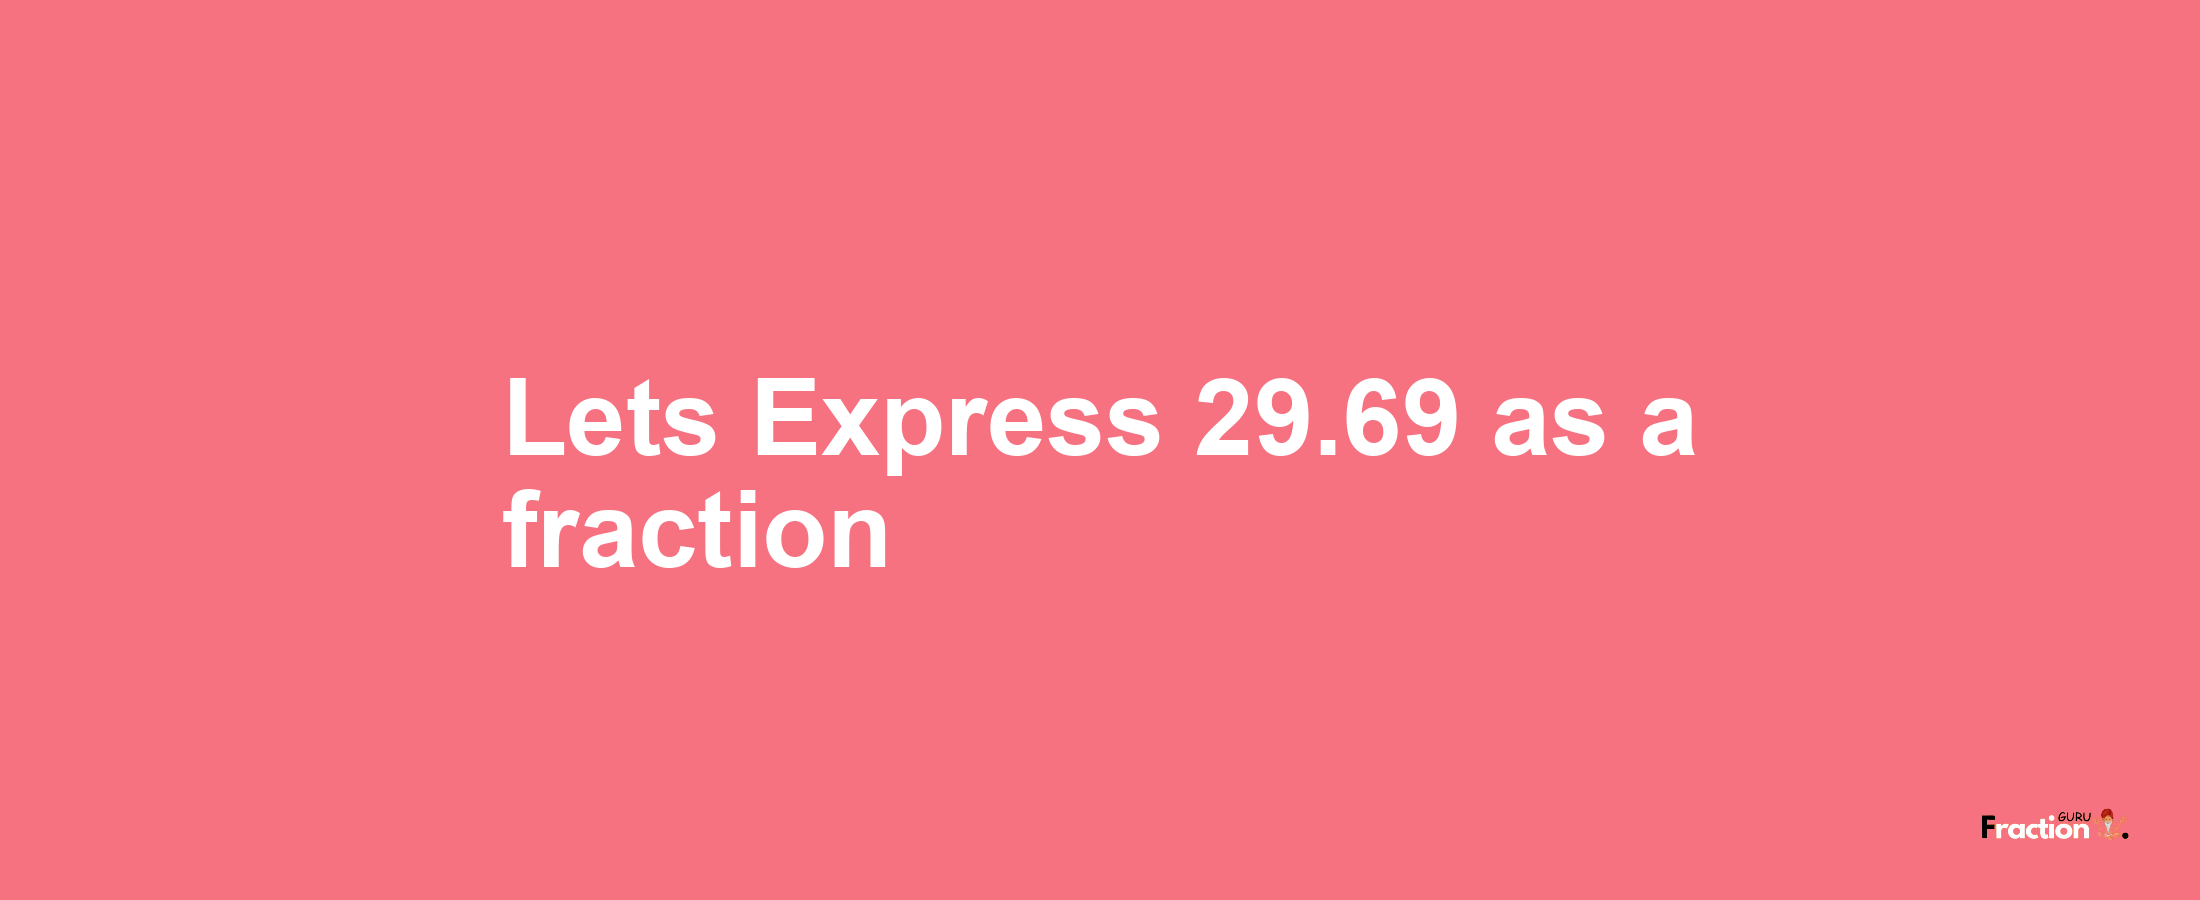 Lets Express 29.69 as afraction